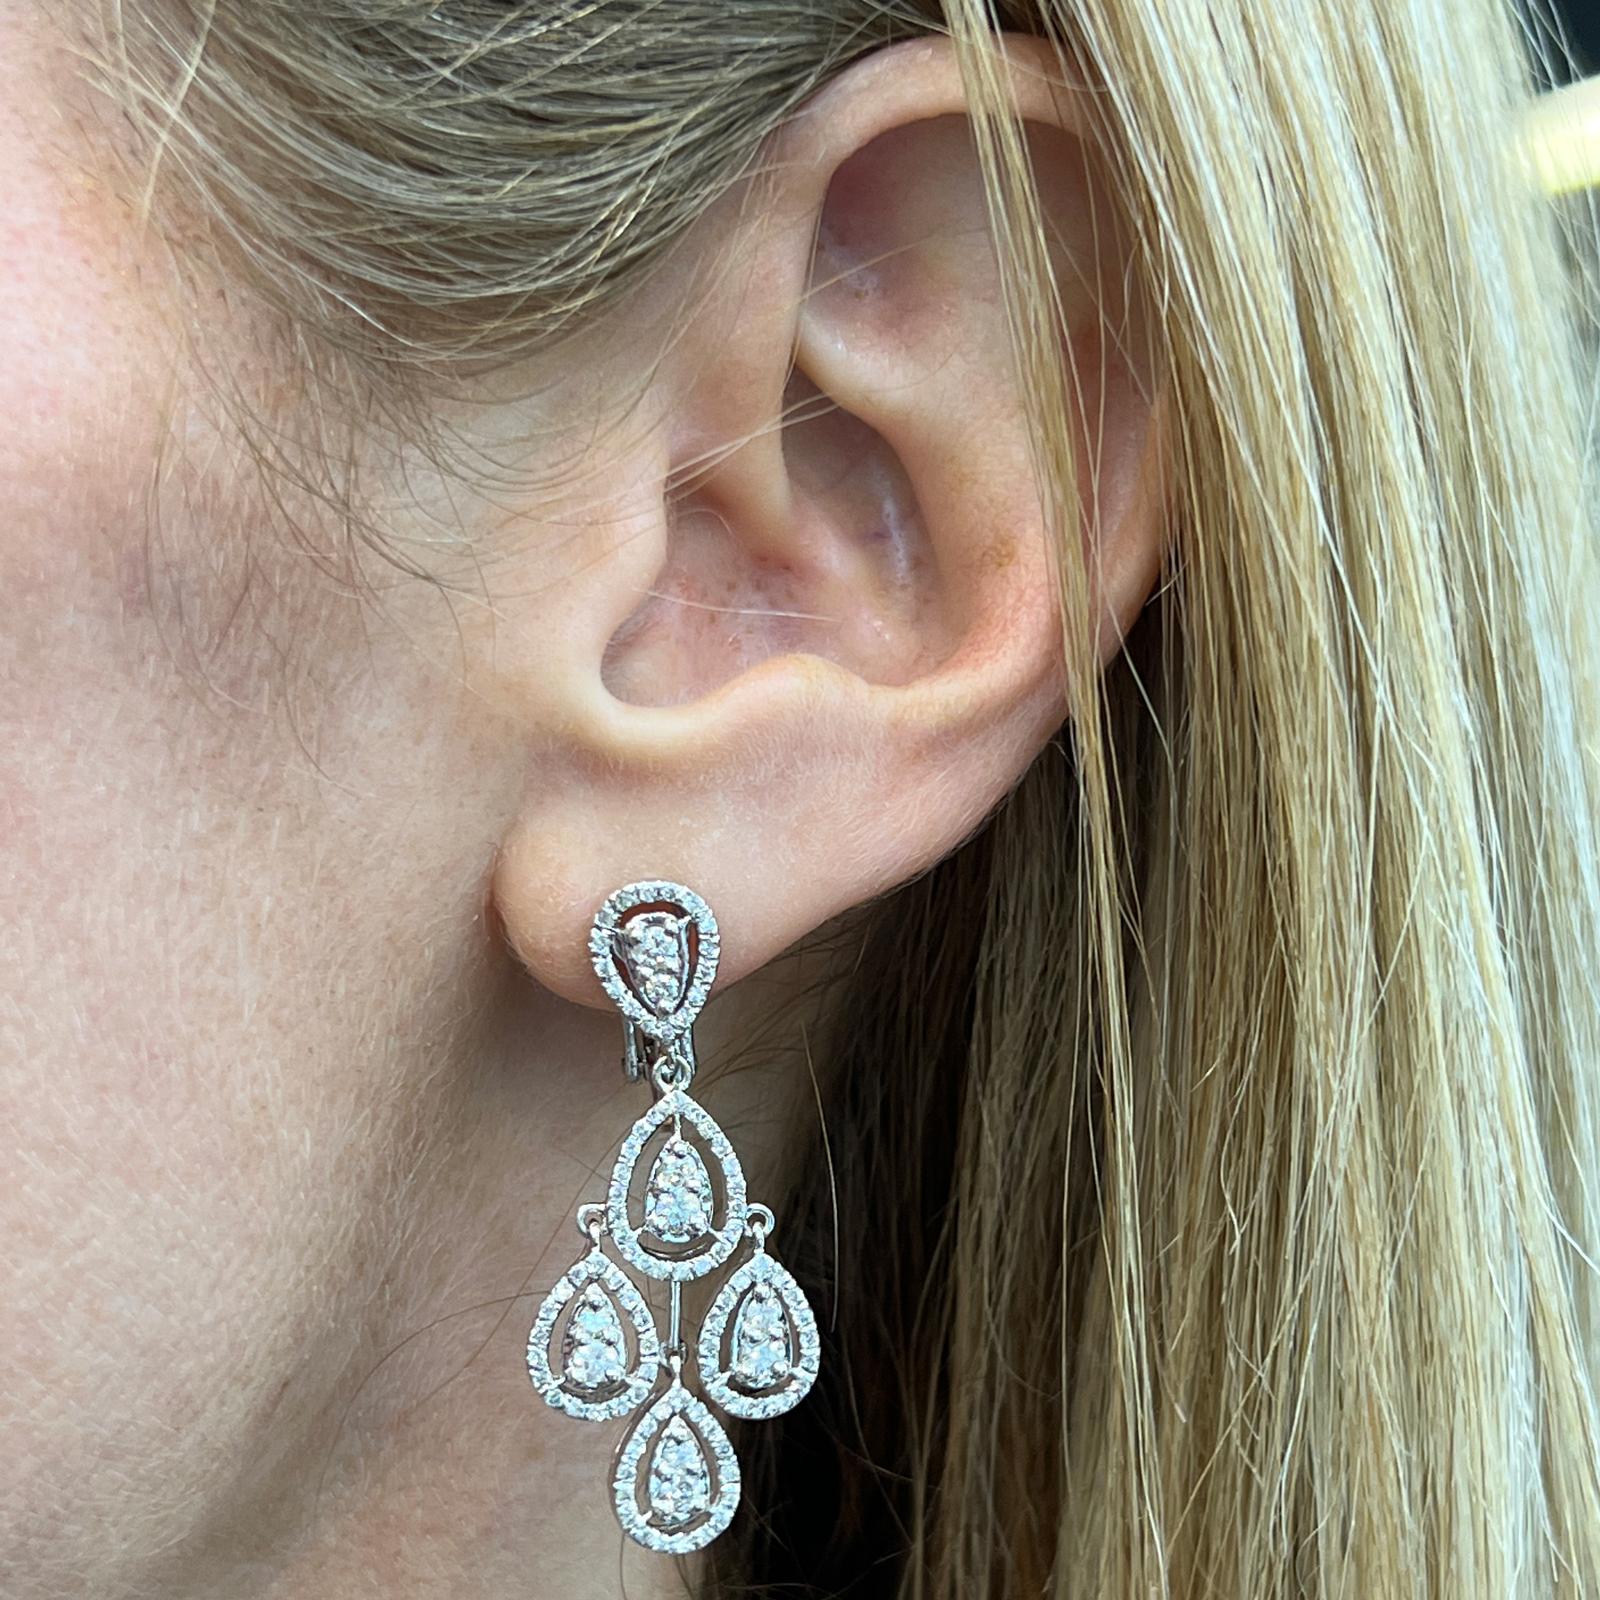 Gorgeous diamond chandelier dangle earrings fashioned in 18 karat white gold. The earrings feature 192 round brilliant cut diamonds weighing approximately  2.00 CTW and graded H-I color and SI clarity. The earrings measure 1.50 inches in length with